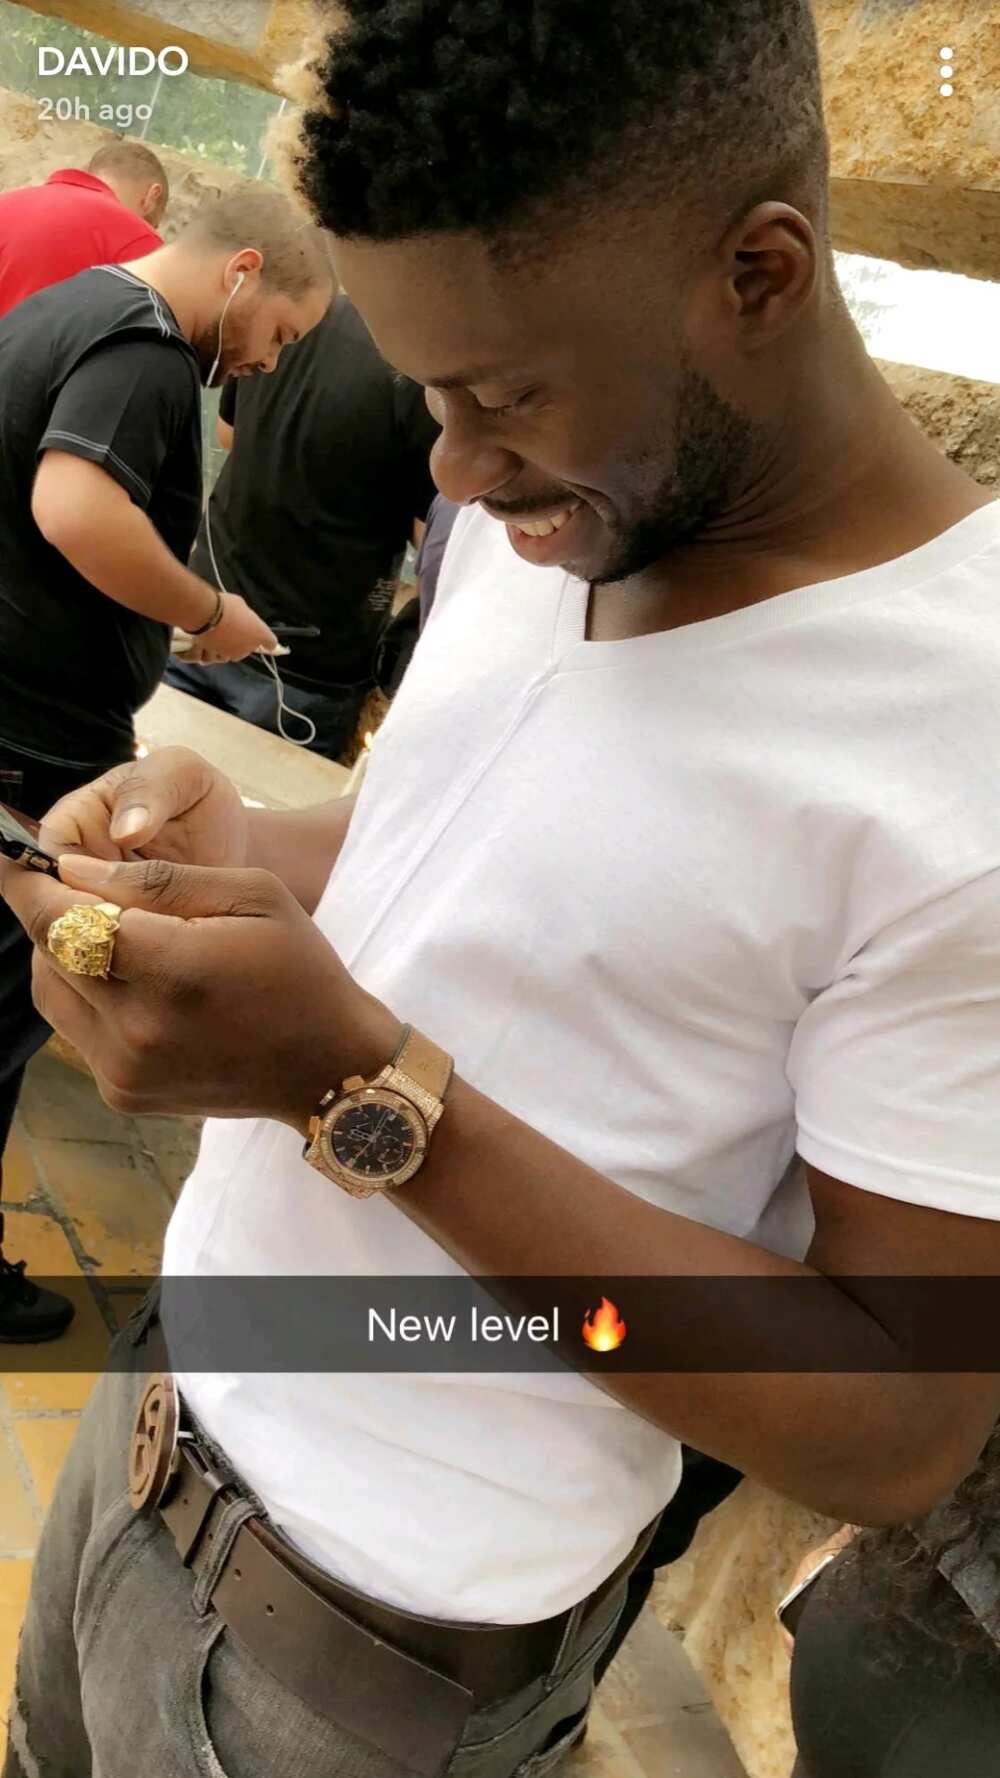 Davido thanks God for his life, buys new Rolex watches to celebrate his birthday